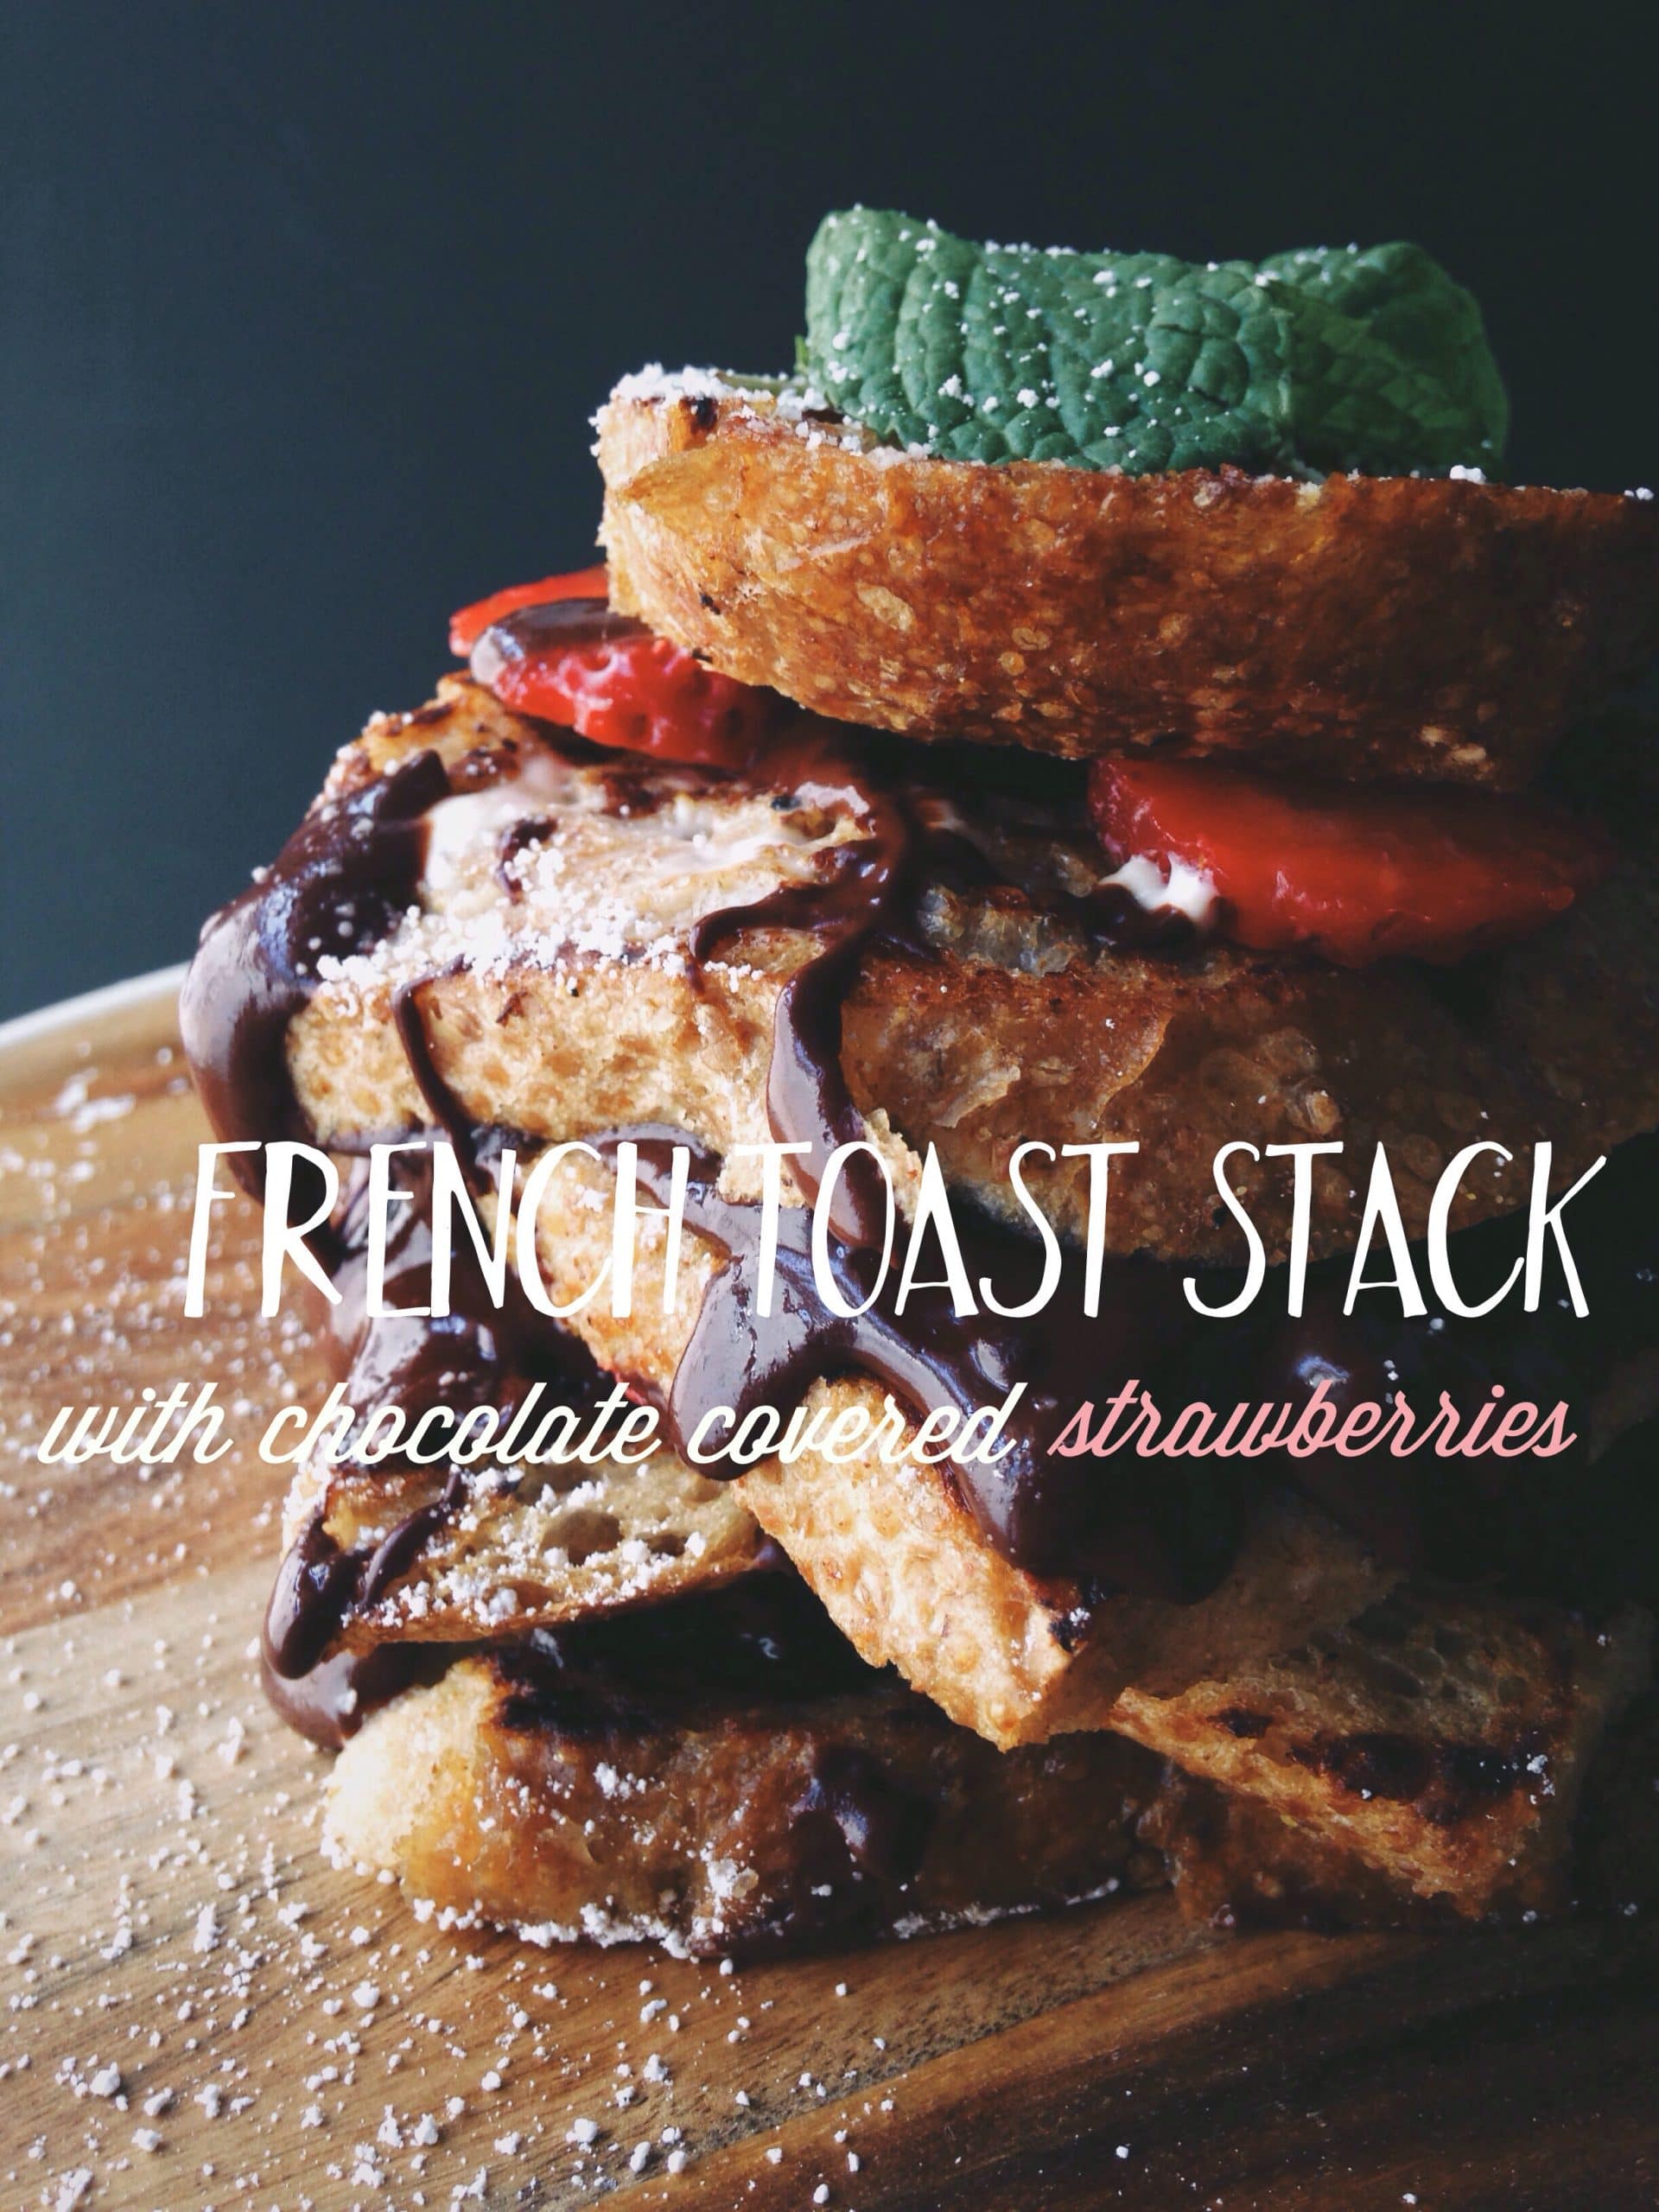 French Toast Stack With Chocolate Covered Strawberries